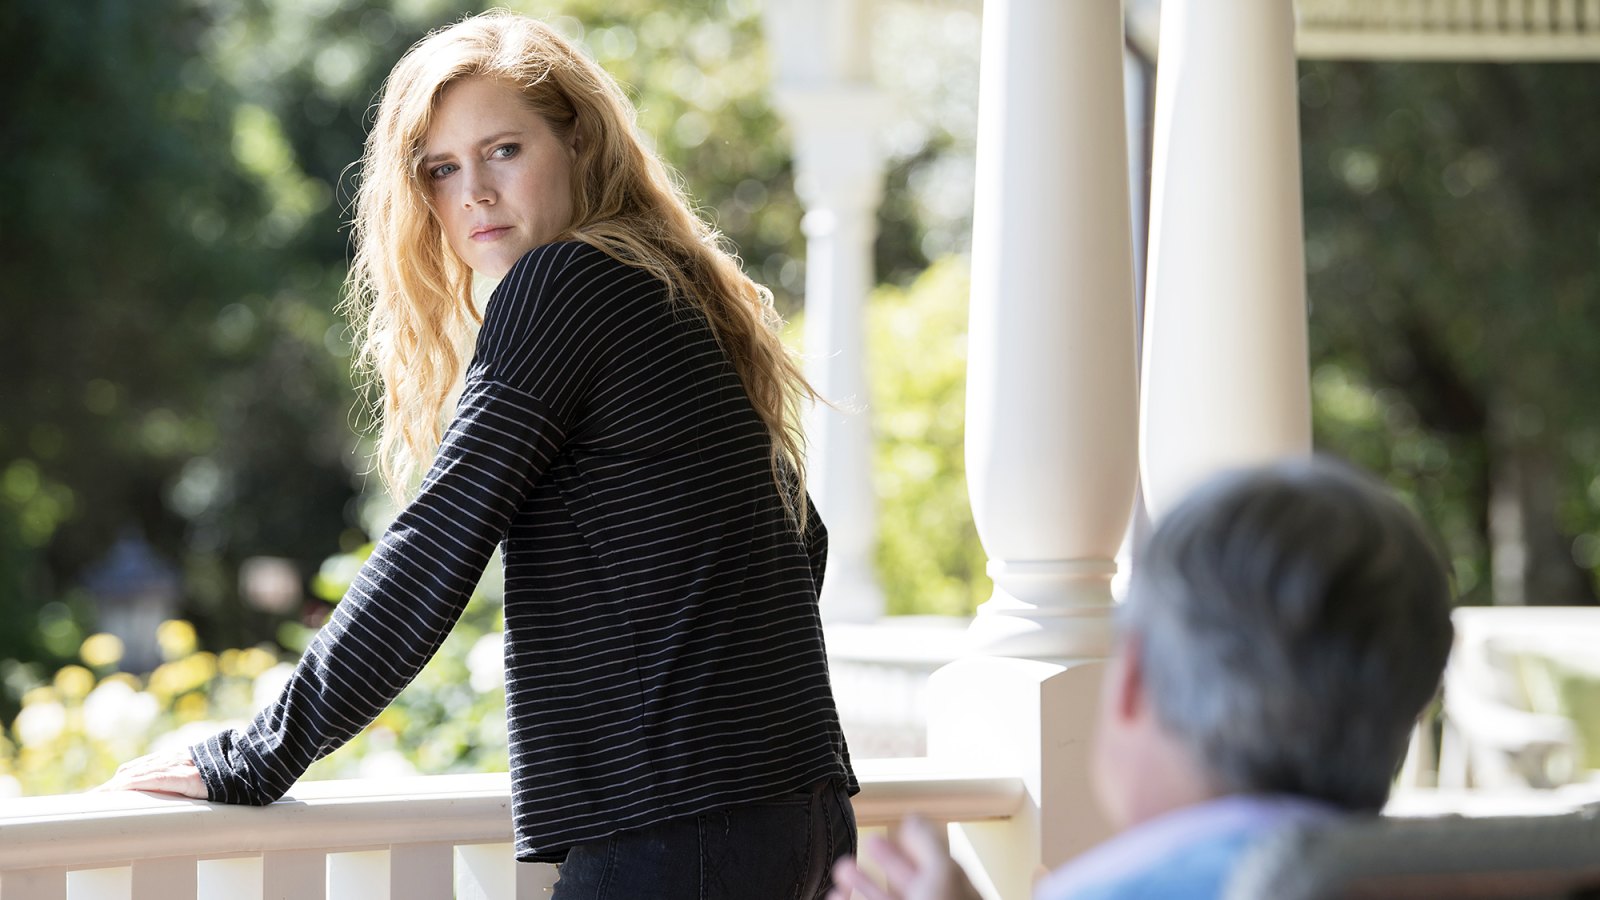 Sharp Objects' Shows Amy Adams 'In All Her Dark Glory'